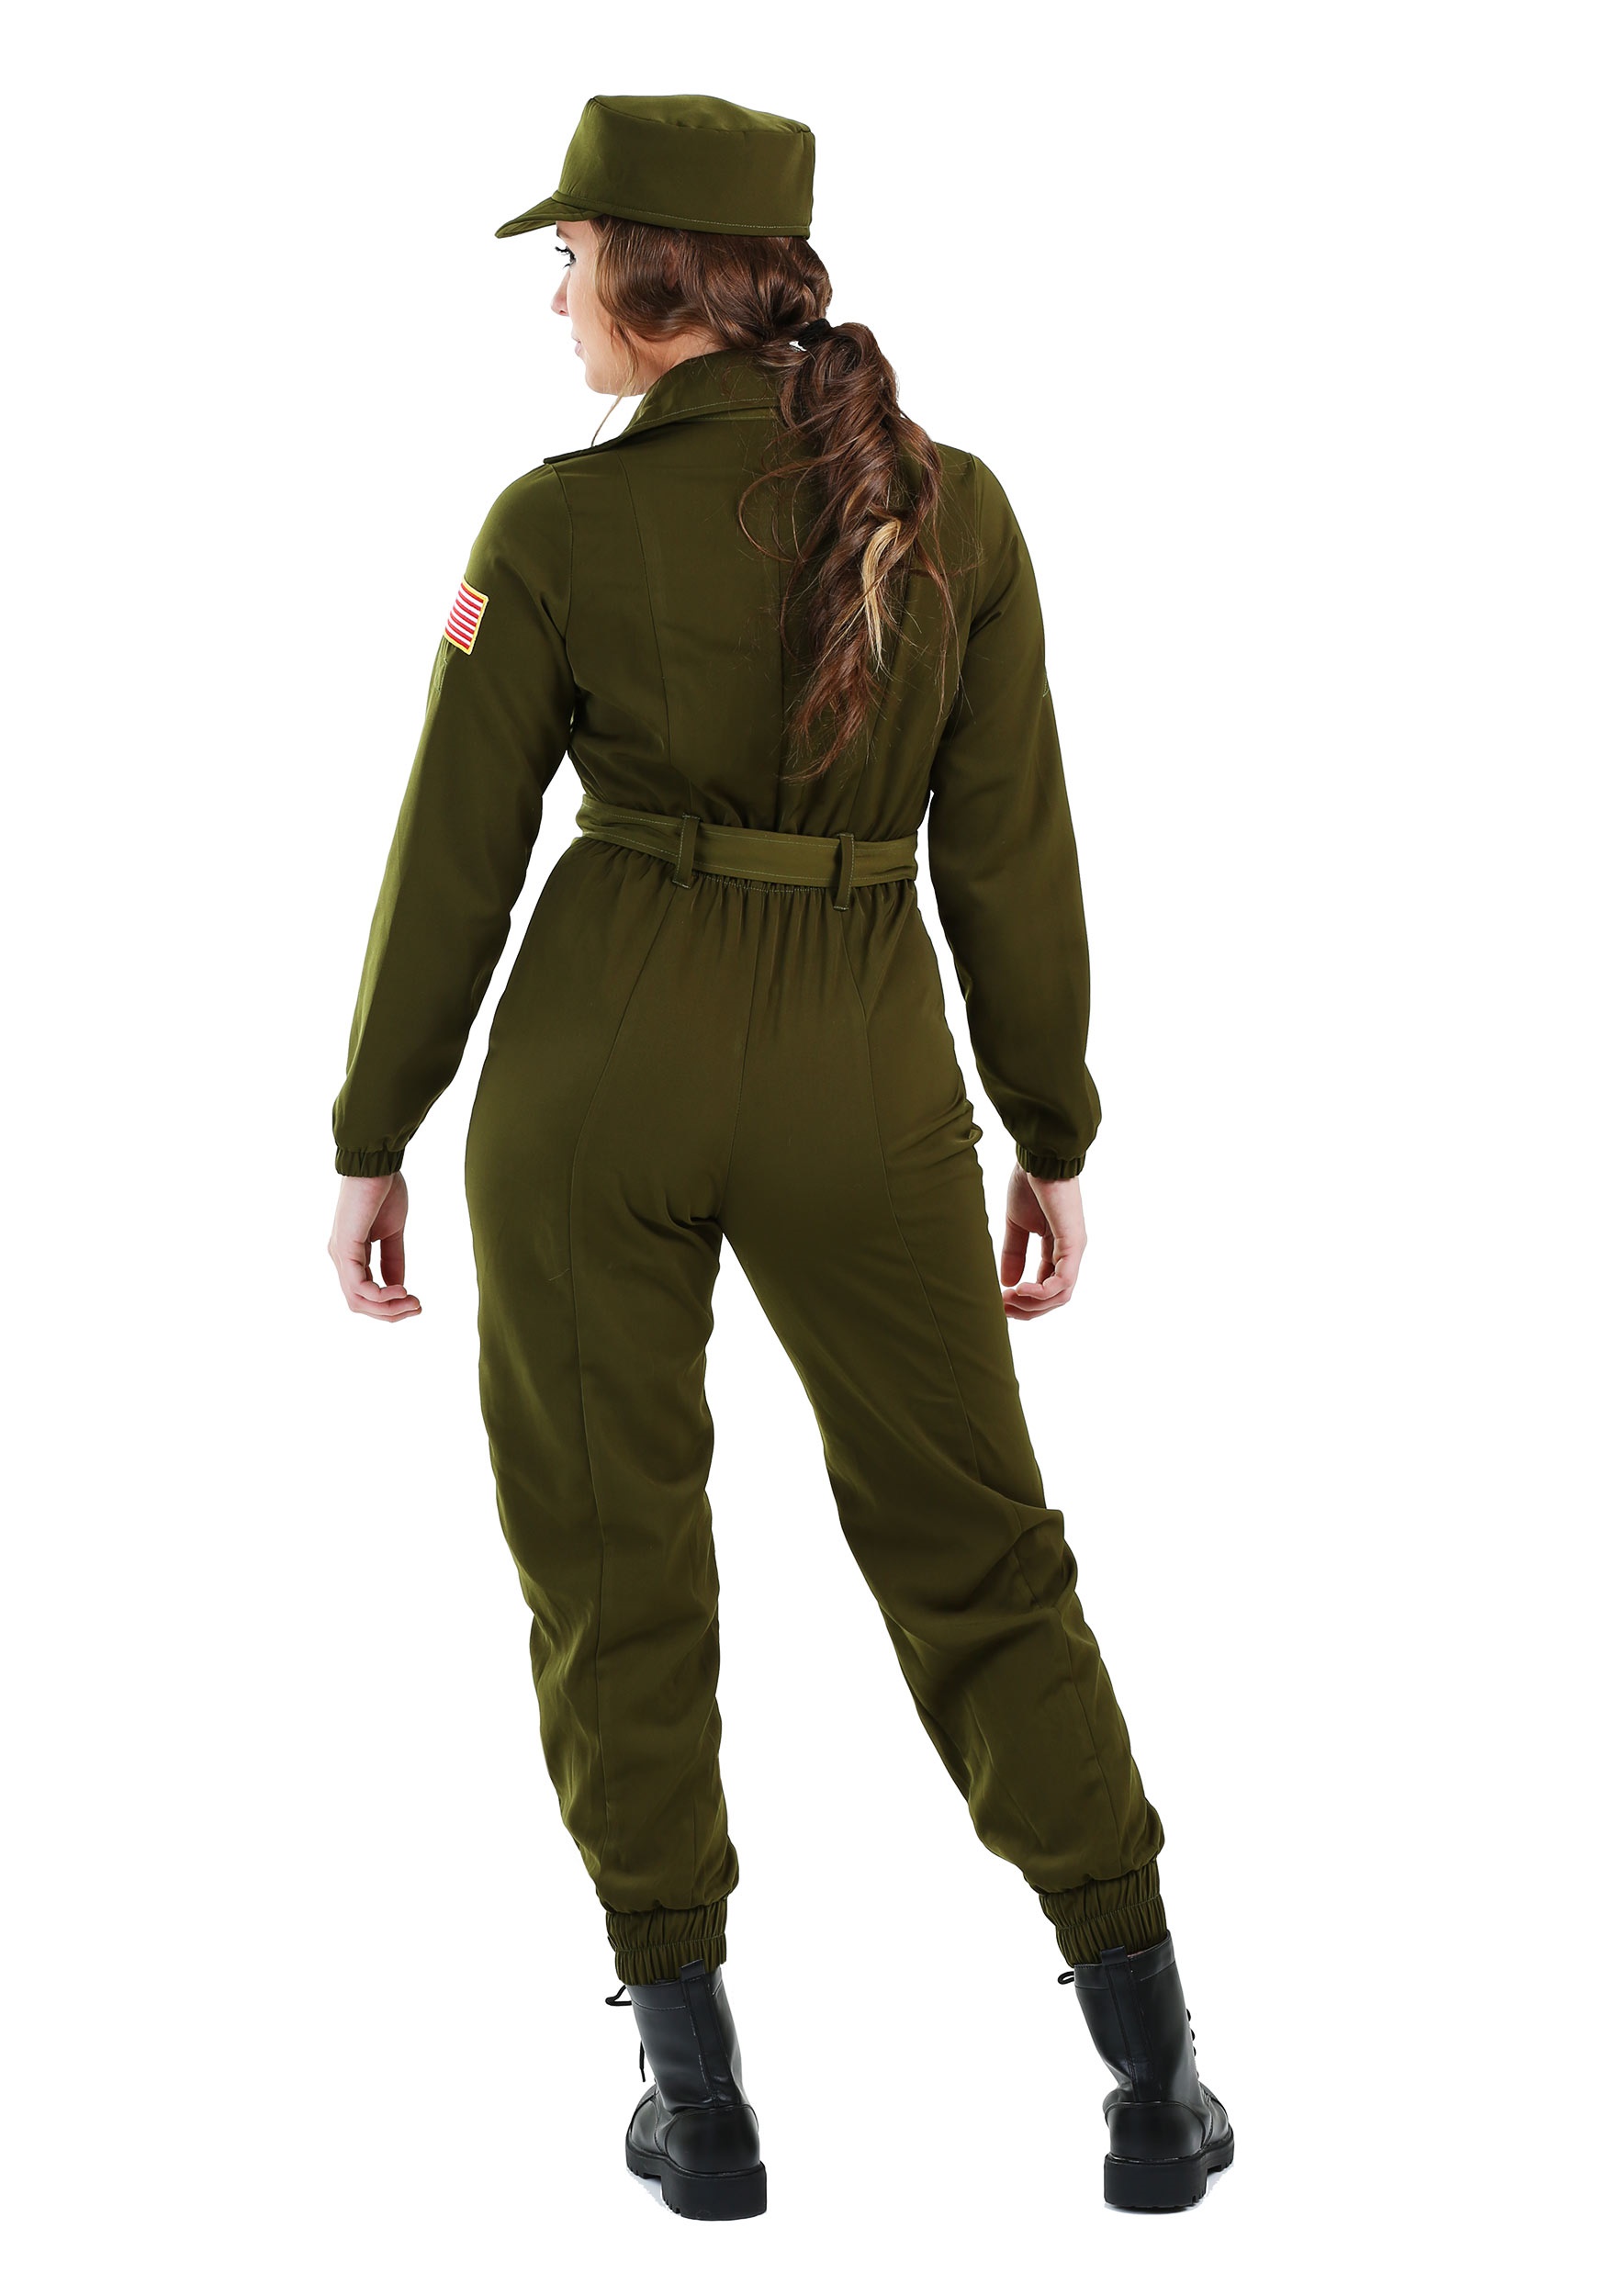 Army Flightsuit Women's Costume , Army Costumes For Women